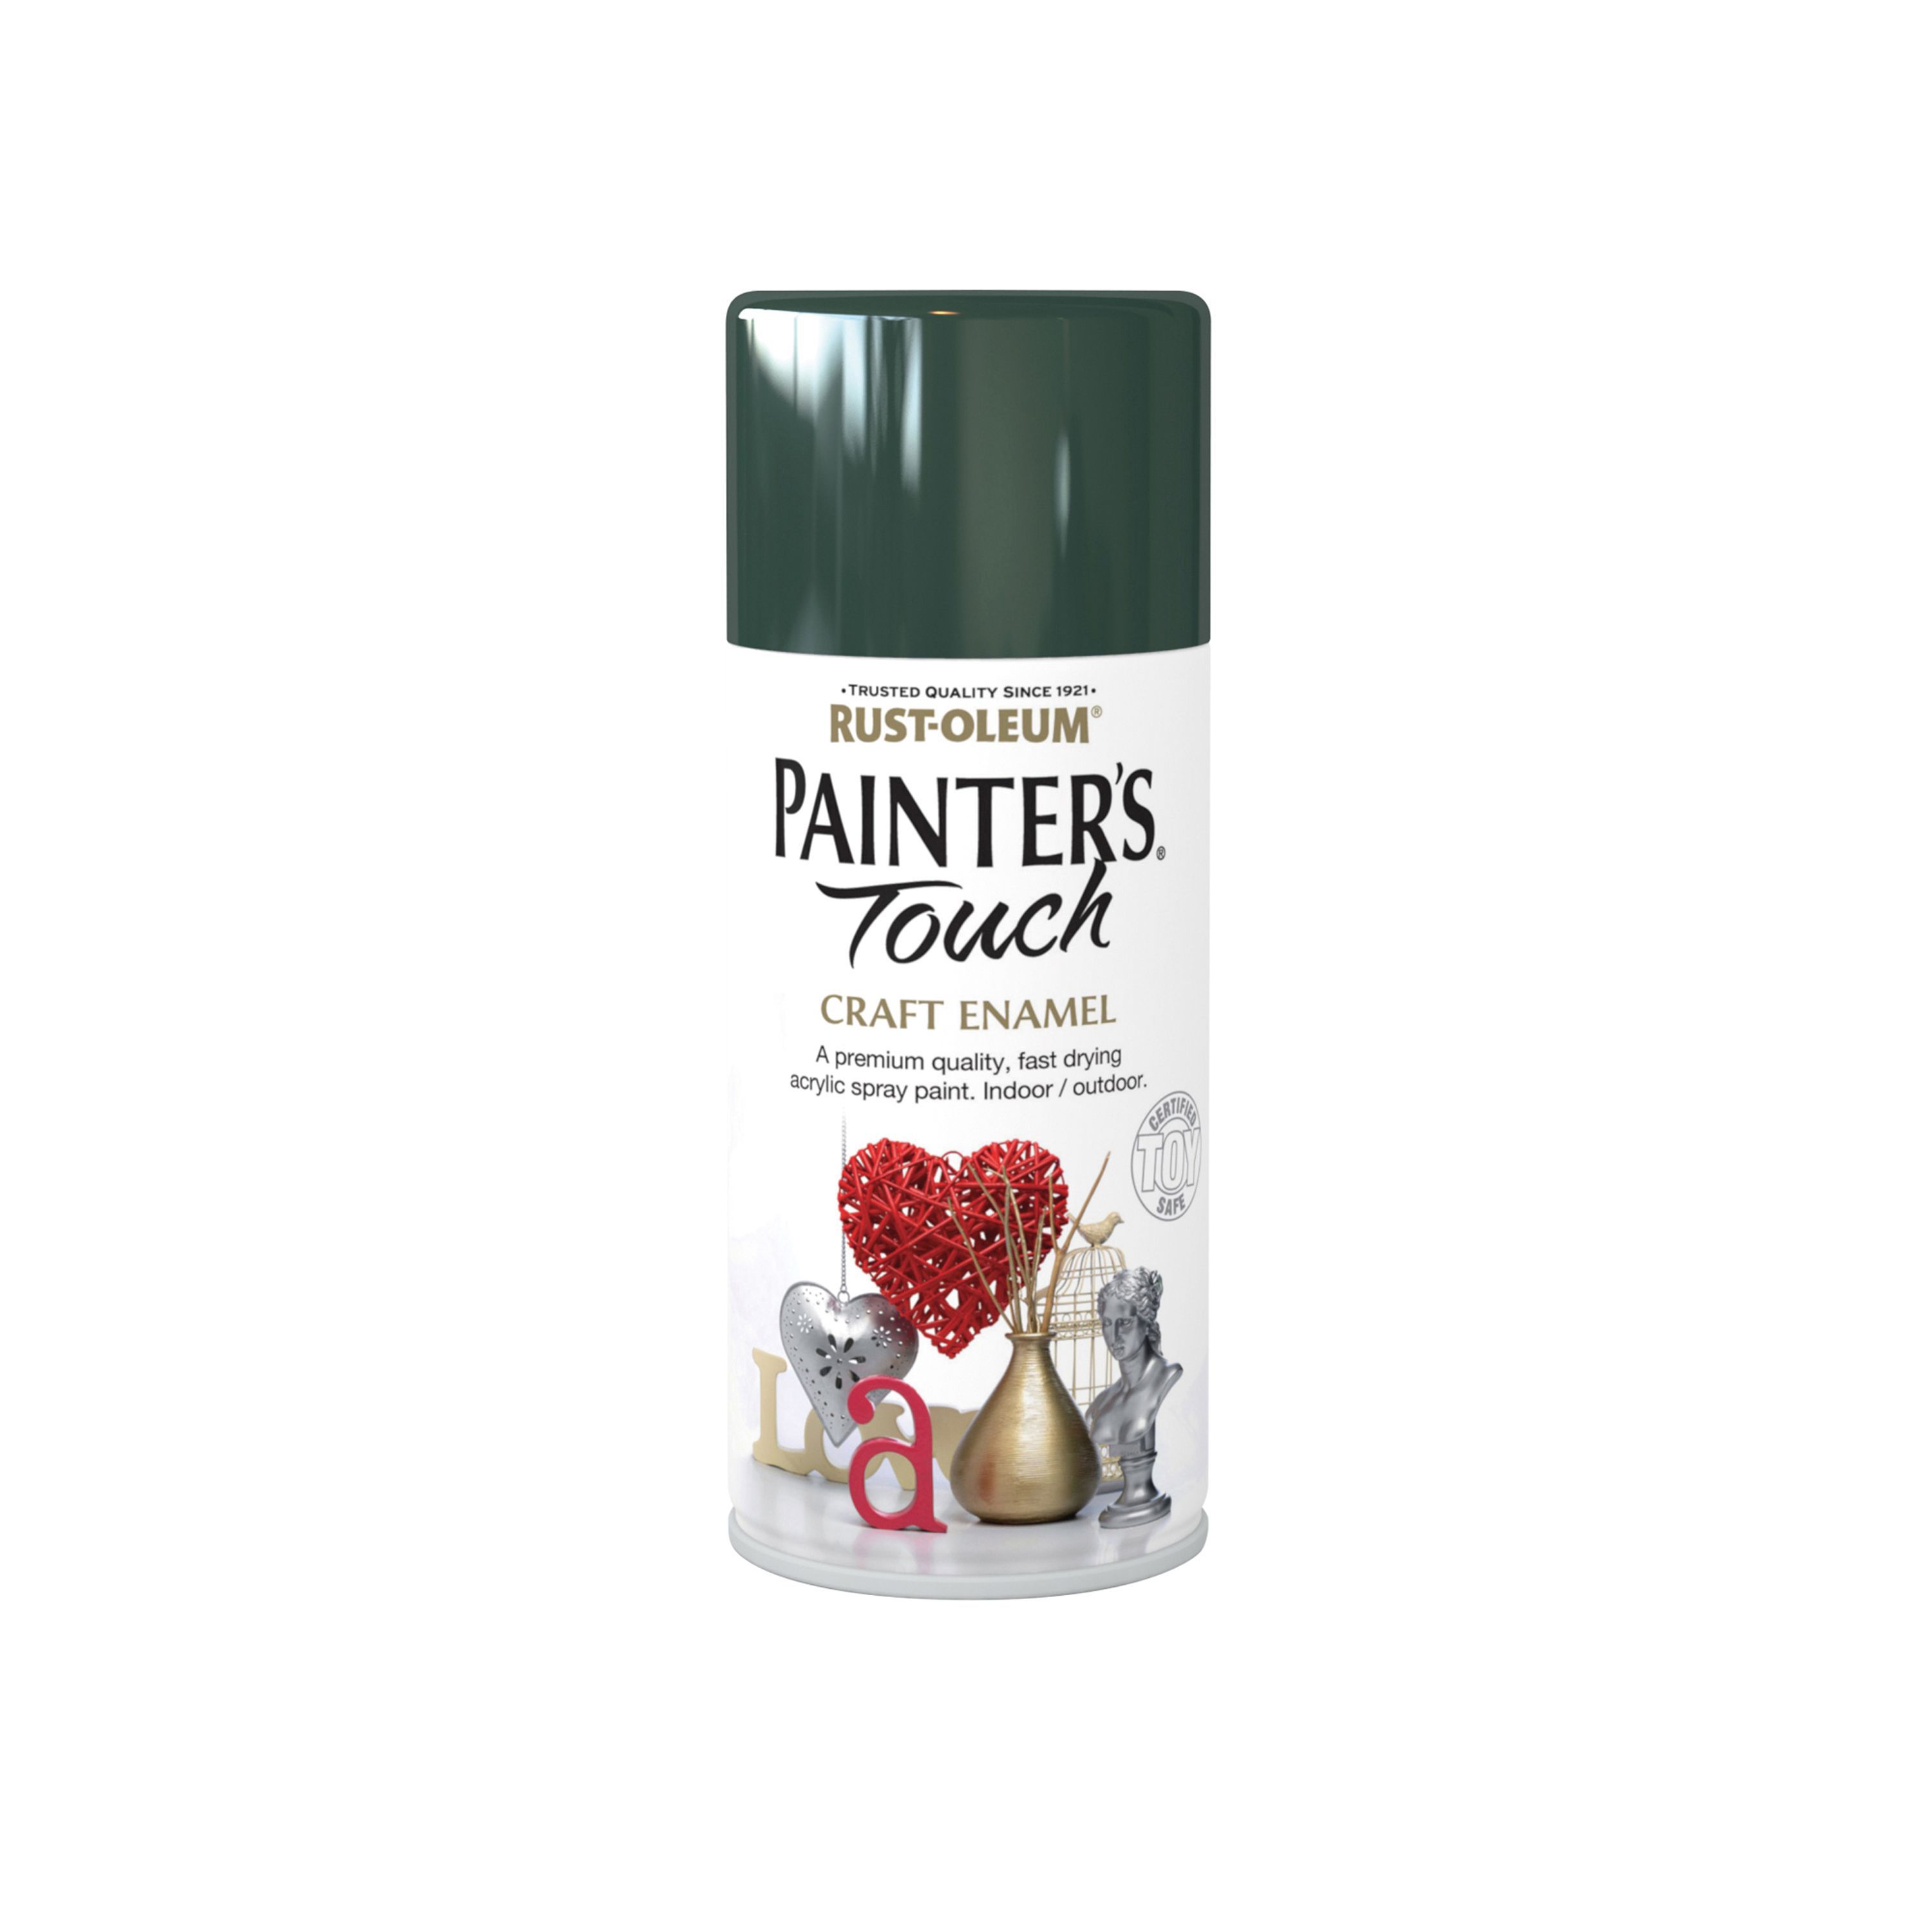 Rust-Oleum Painter's touch Oxford green Gloss Multi-surface Decorative spray paint, 150ml